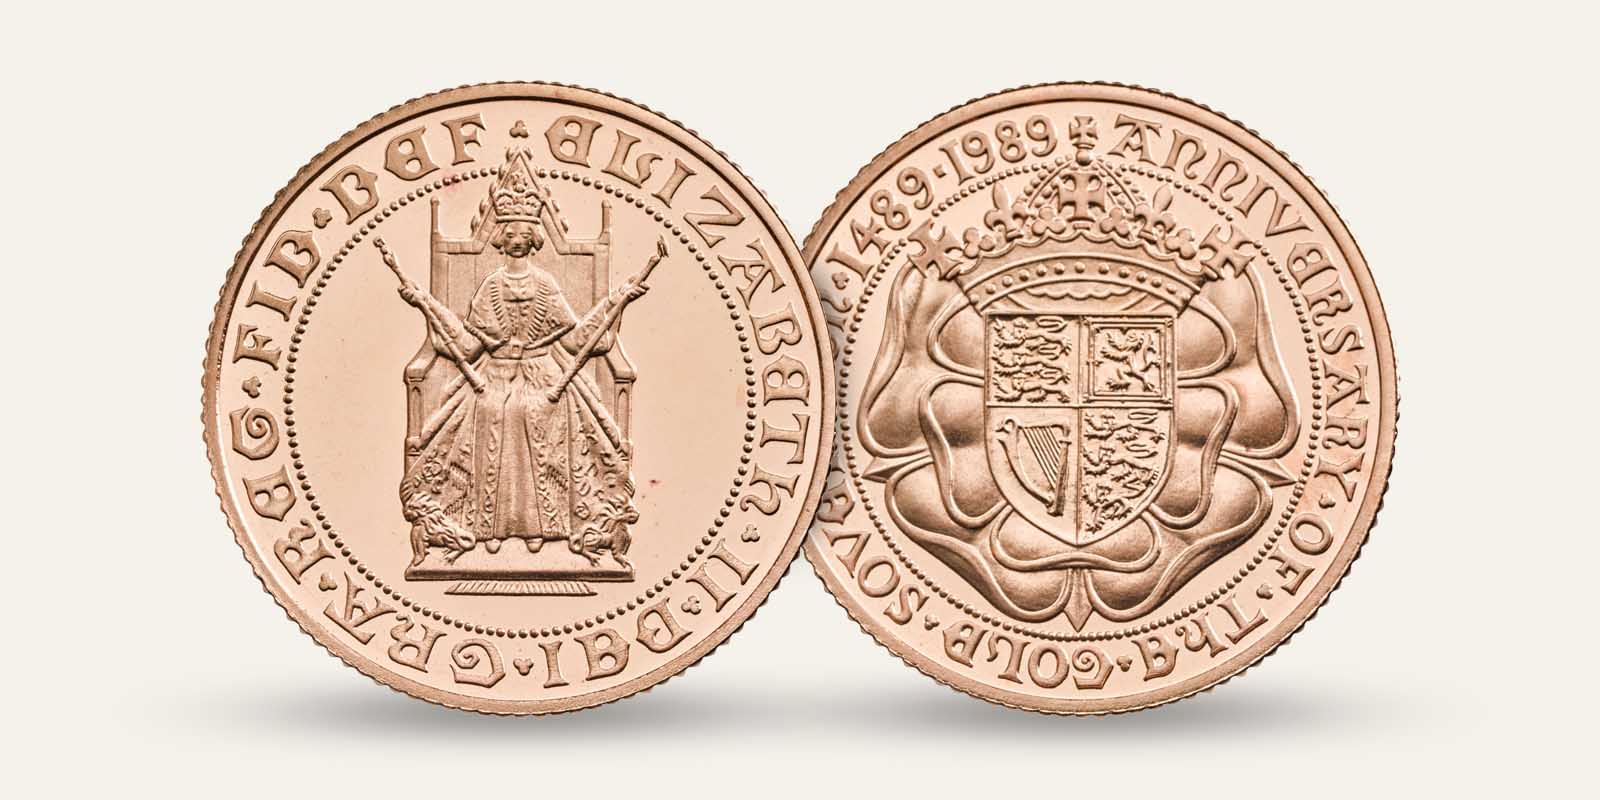 3-1989-500th-anniversary-of-the-sovereign.jpg